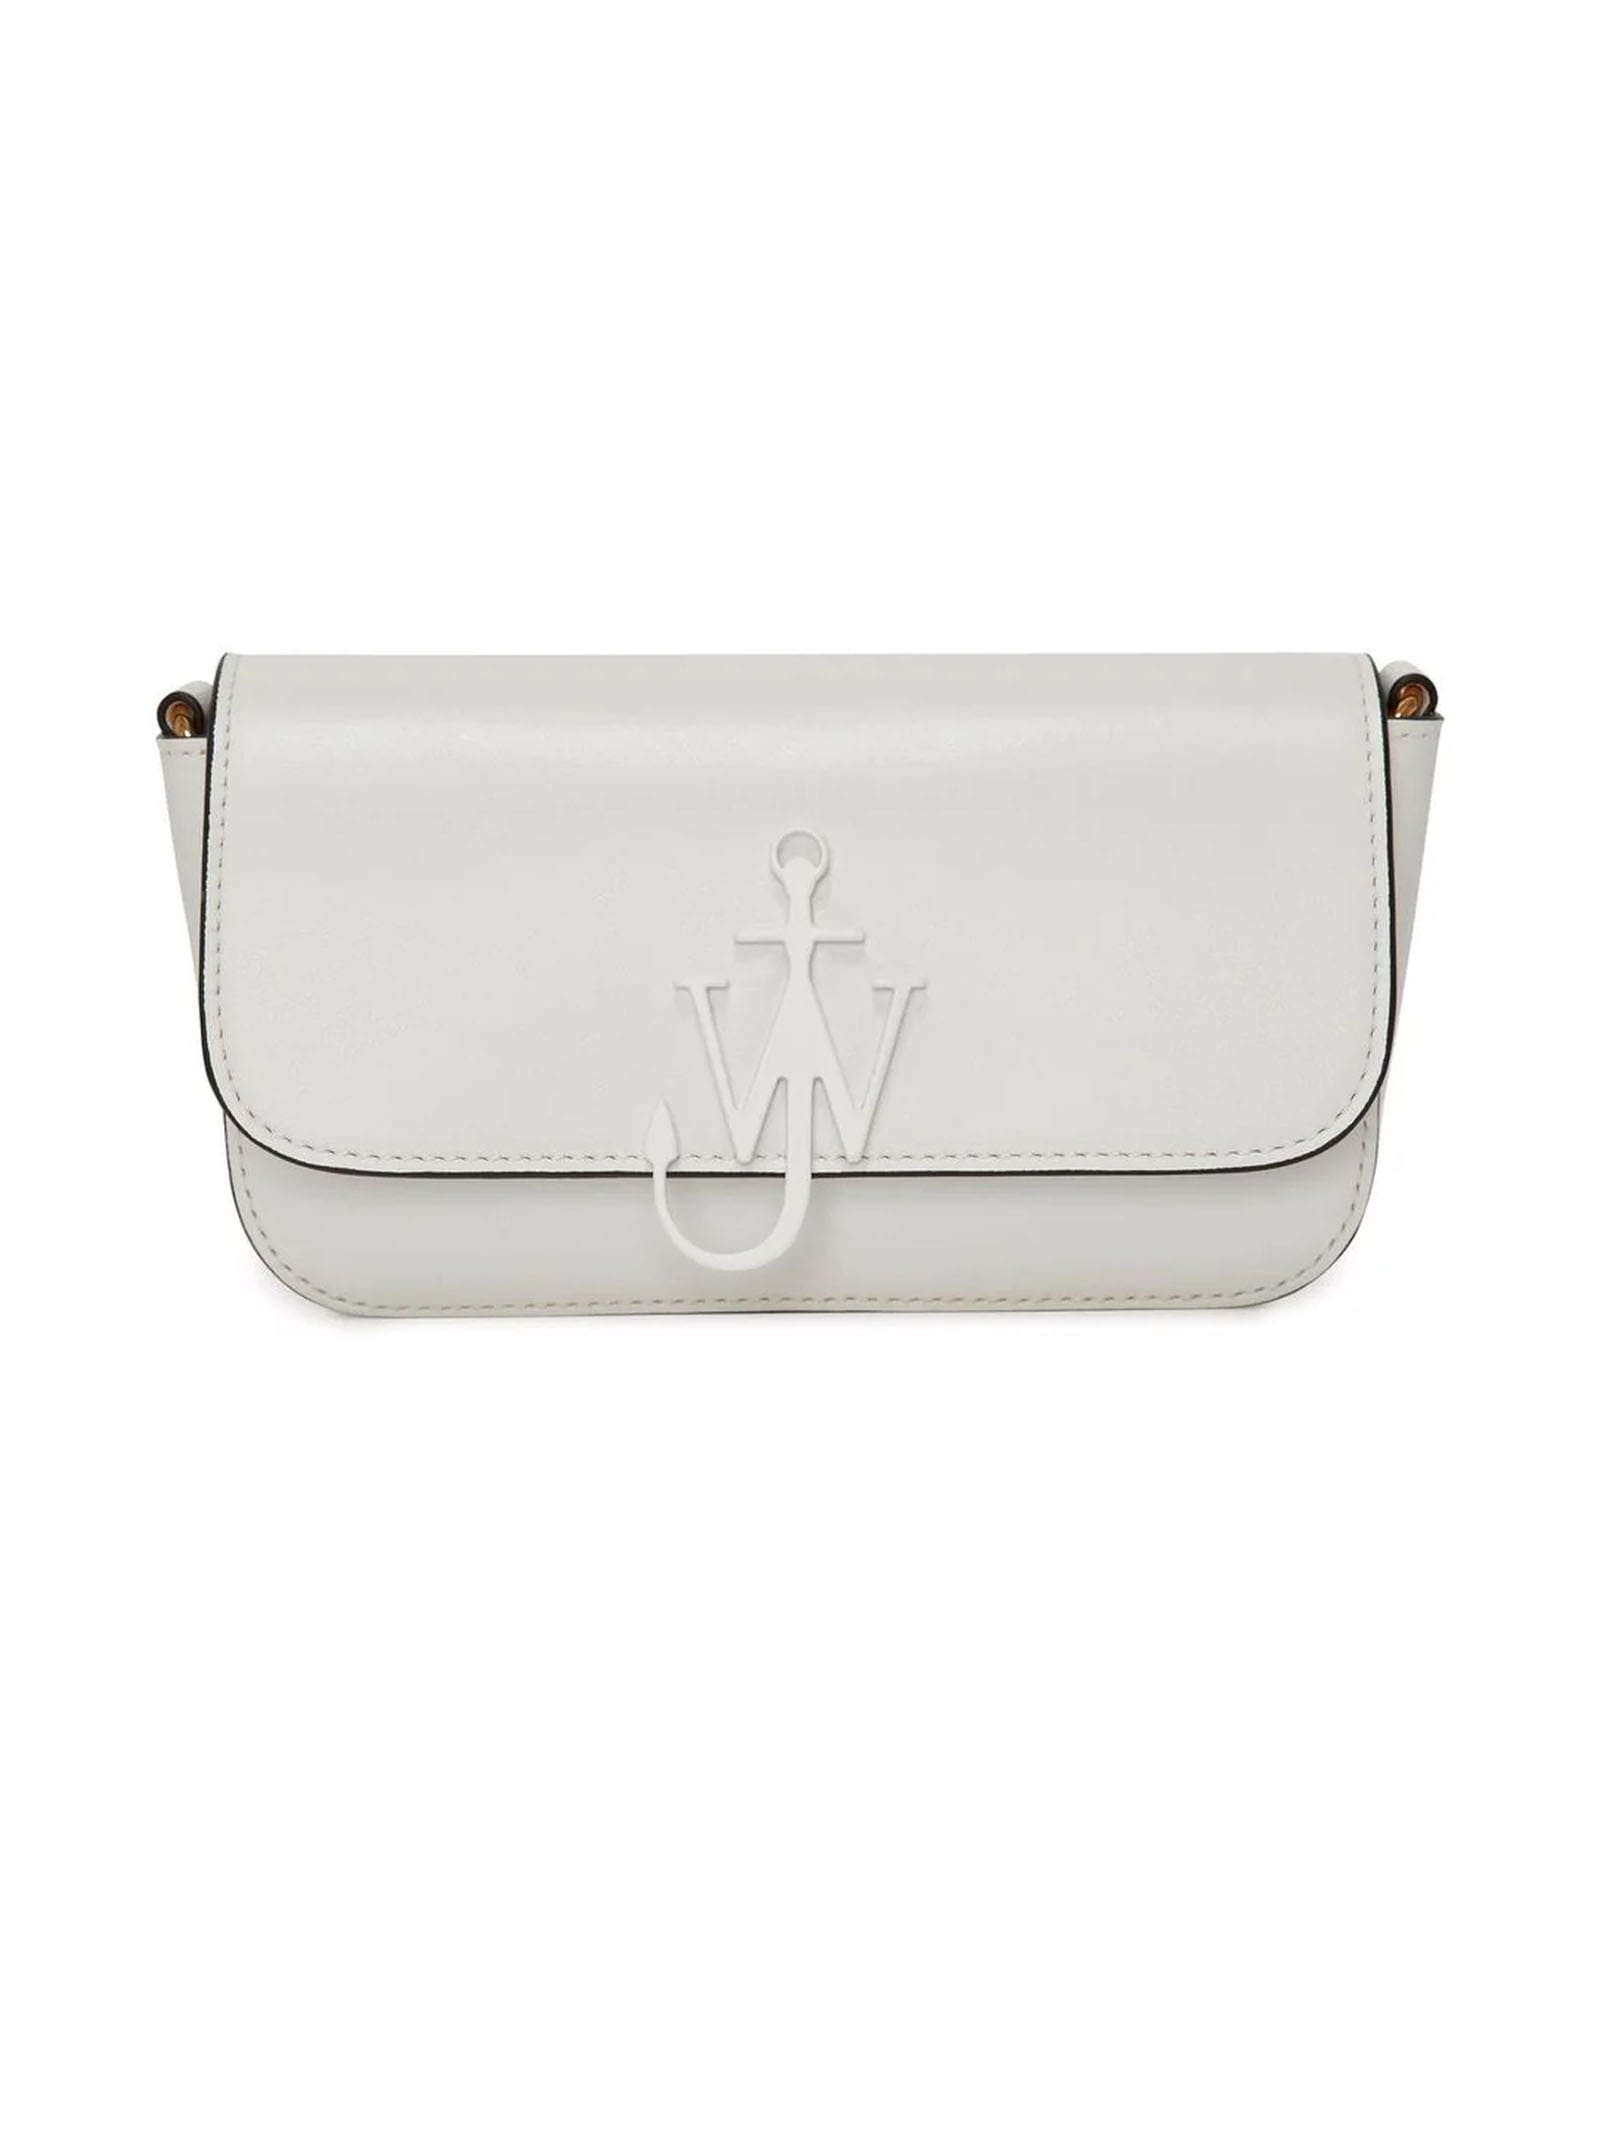 J.W. Anderson White Leather Baguette Bag